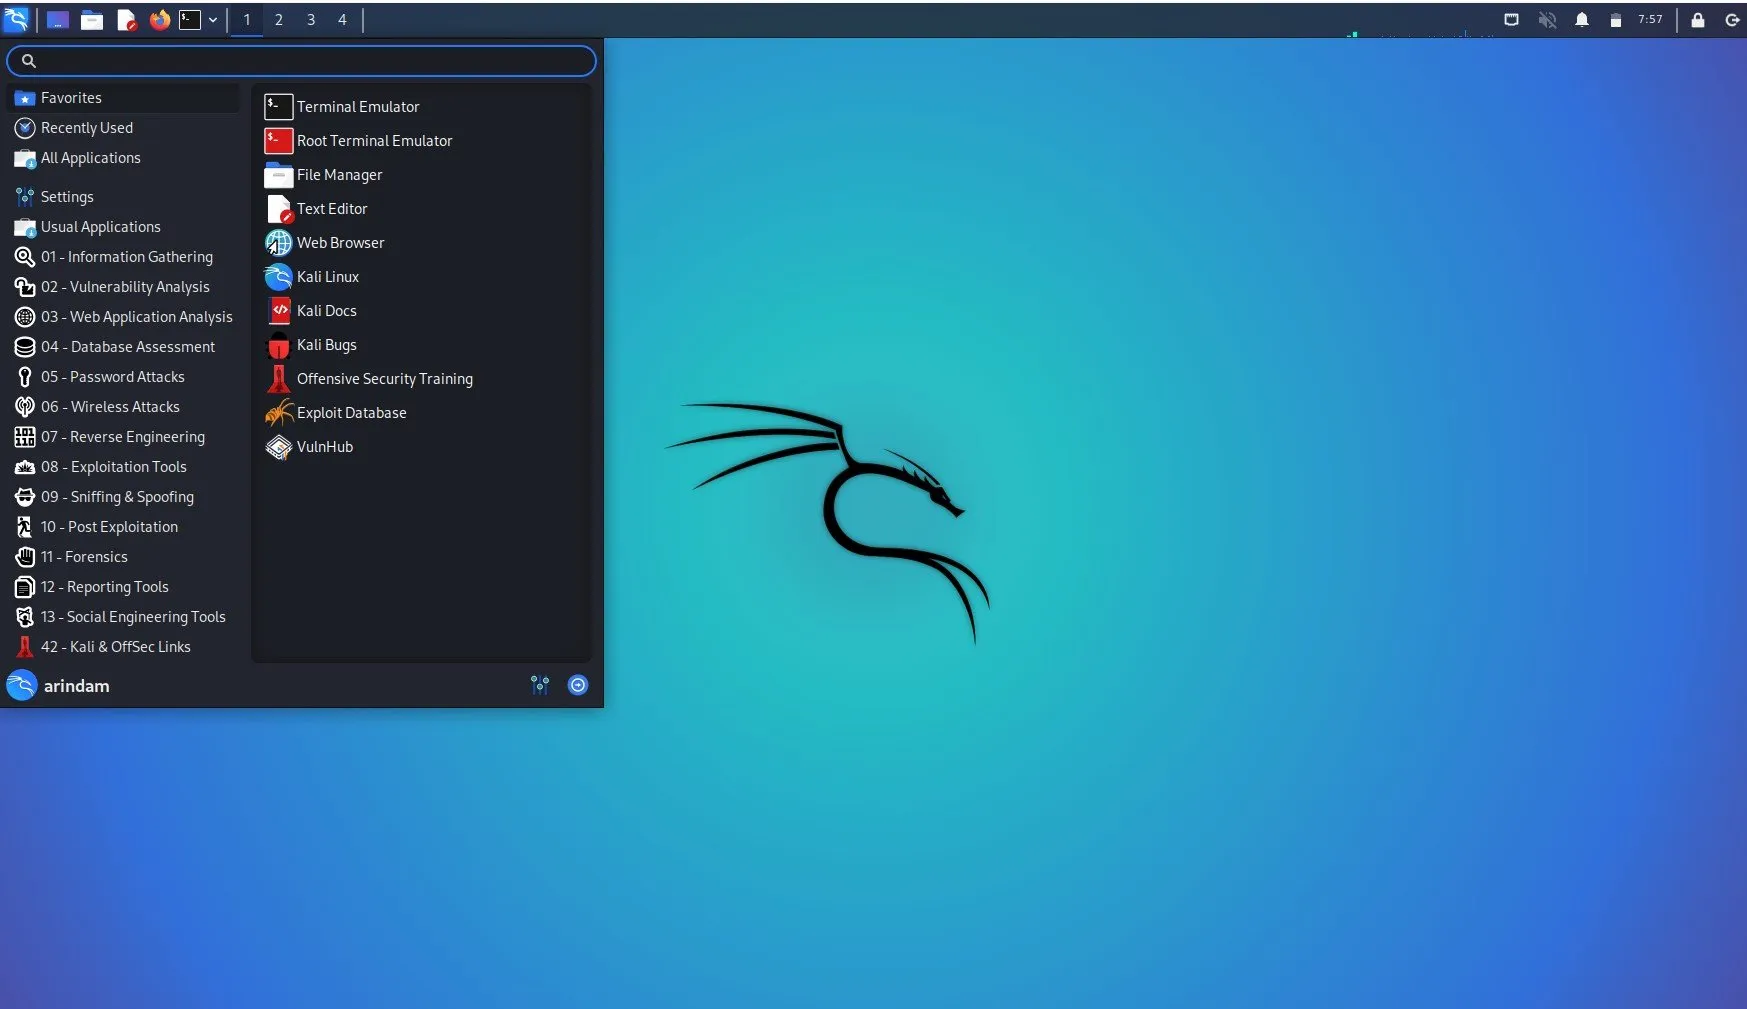 Kali-Linux - popular penetration testing OS for security analysts